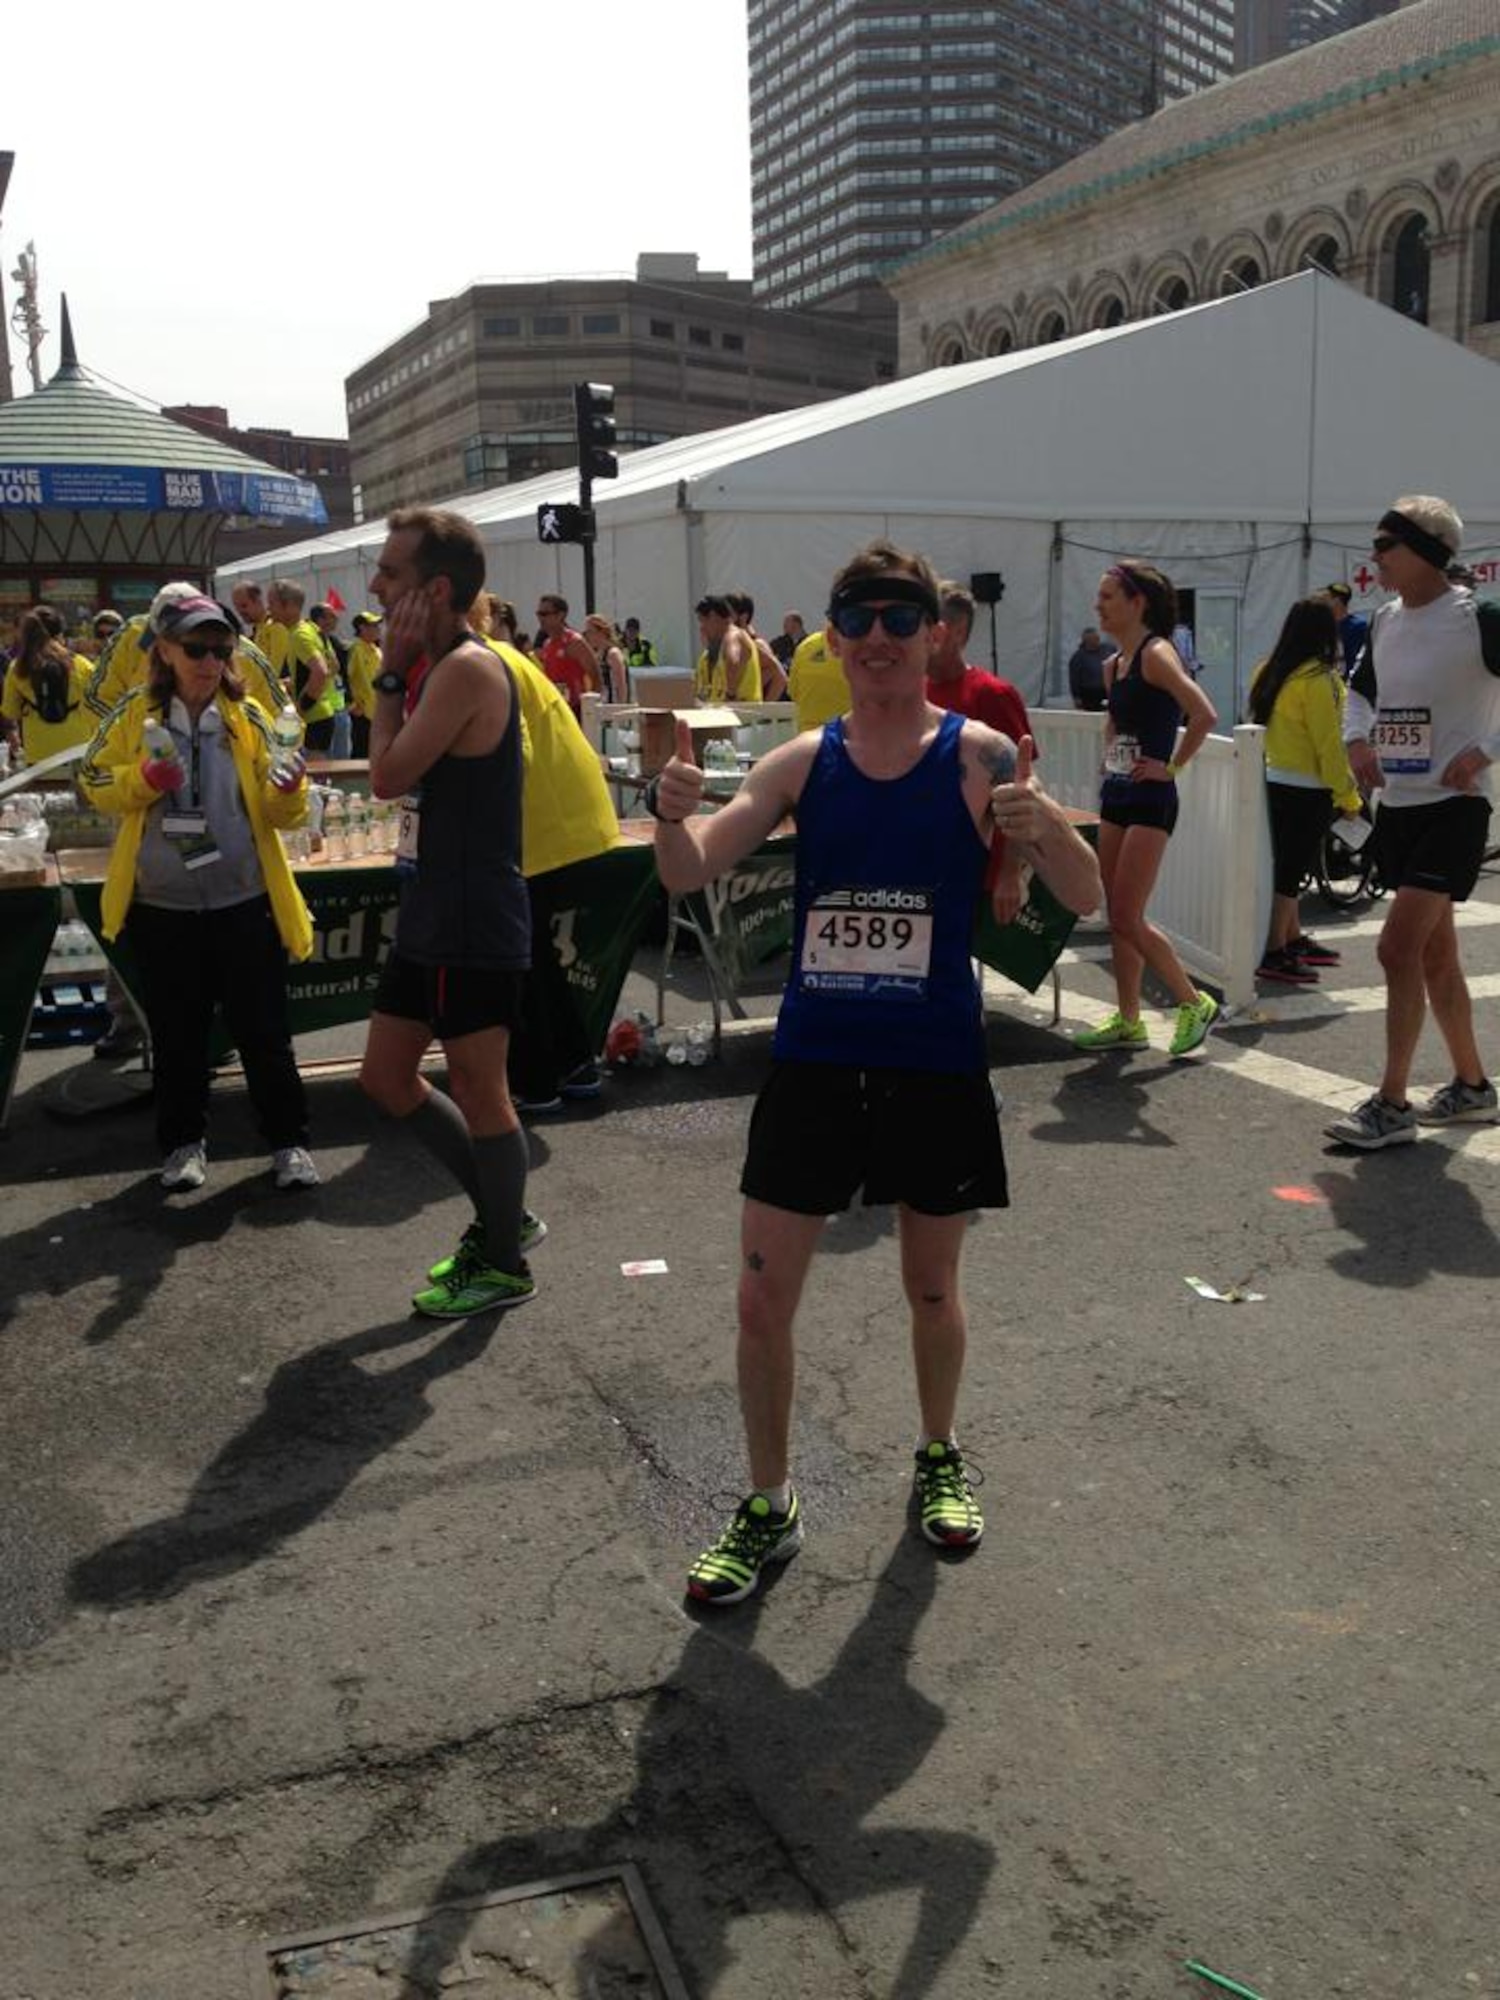 TSgt. Blaine Truman, 43rd Aircraft Maintenance Unit F22 flightline expeditor, gives two thumbs up after completing the Boston Marathon in 2013. He finished the race twenty minutes before the bombs were detonated. (U.S. Air Force courtesy photo)